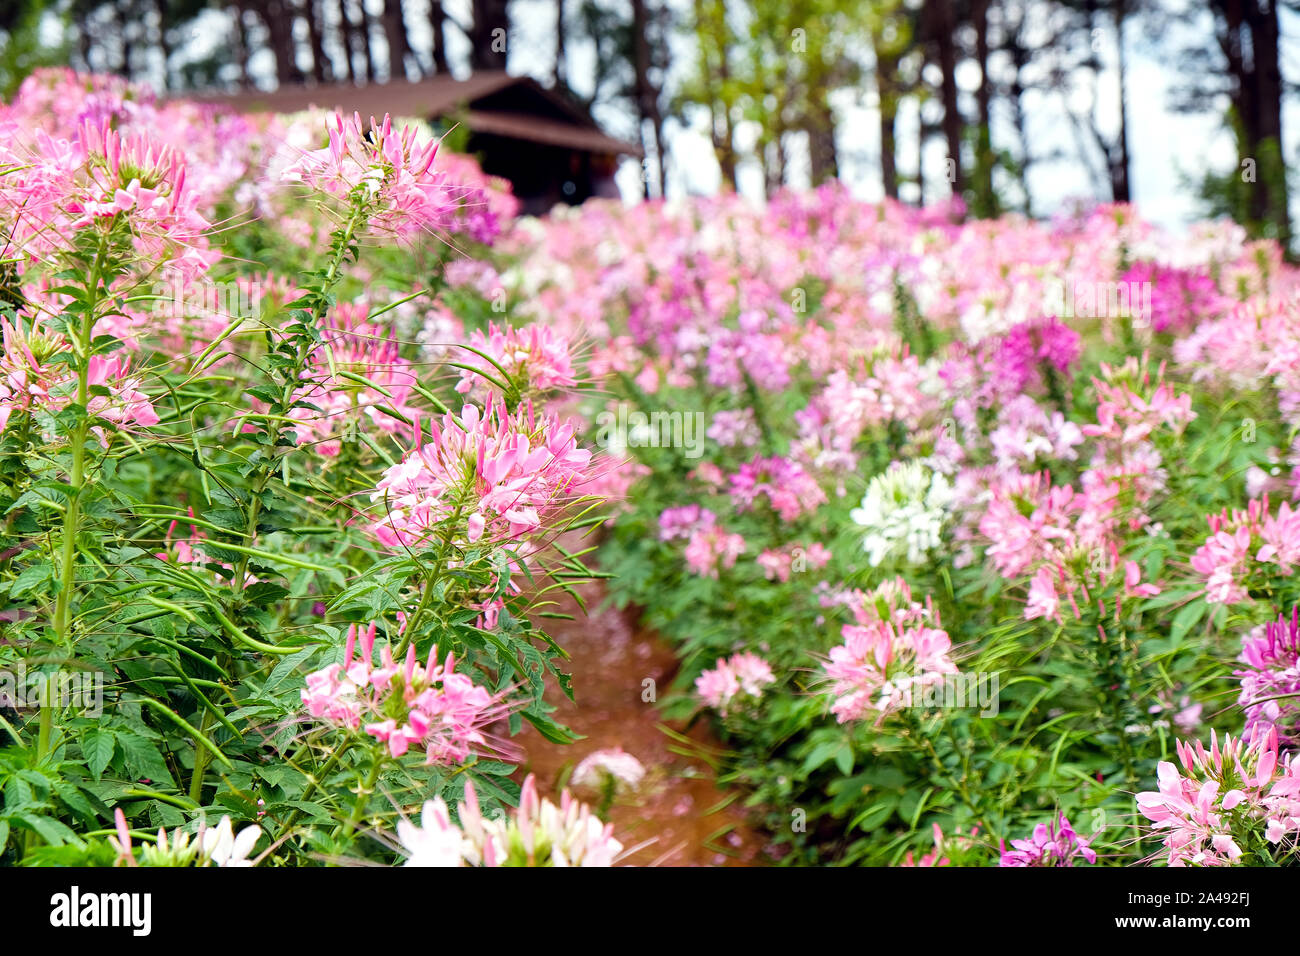 Pink and white beautiful Spider flower in the garden Stock Photo